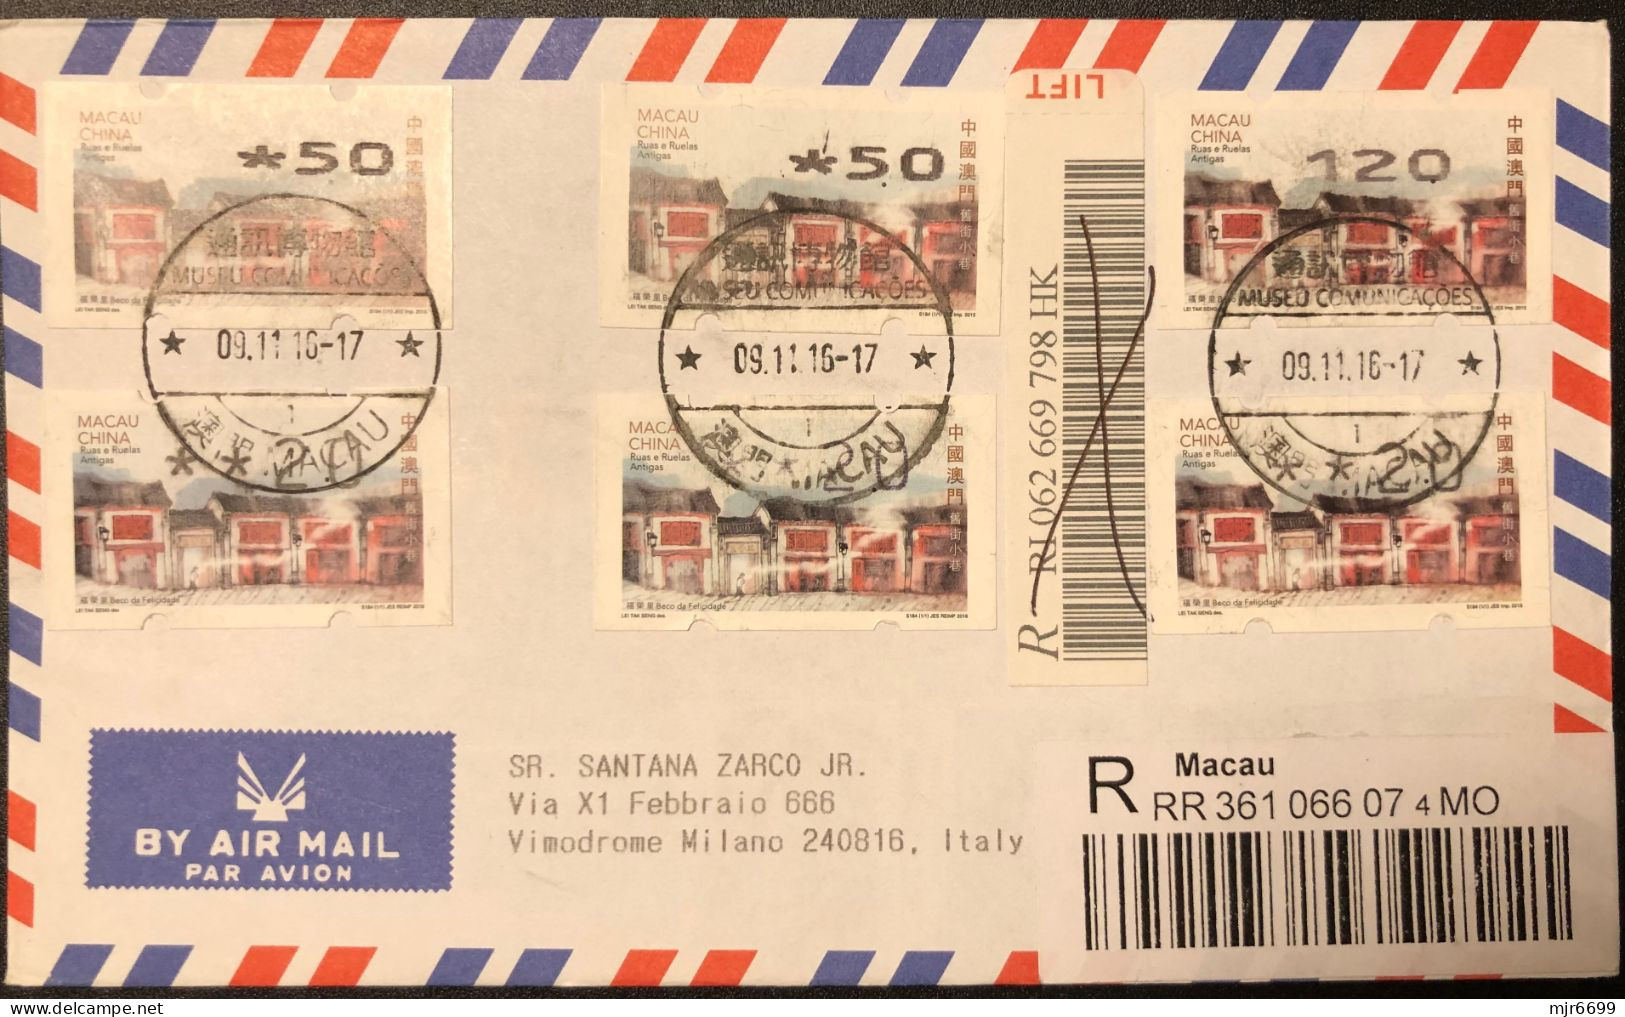 2016 MACAU ATM LABEL OLD STREETS ISSUE, REGISTERED COVER TO ITALY. 12P LABEL WITH PRINTING ERROR, Shift Left. - Automaten